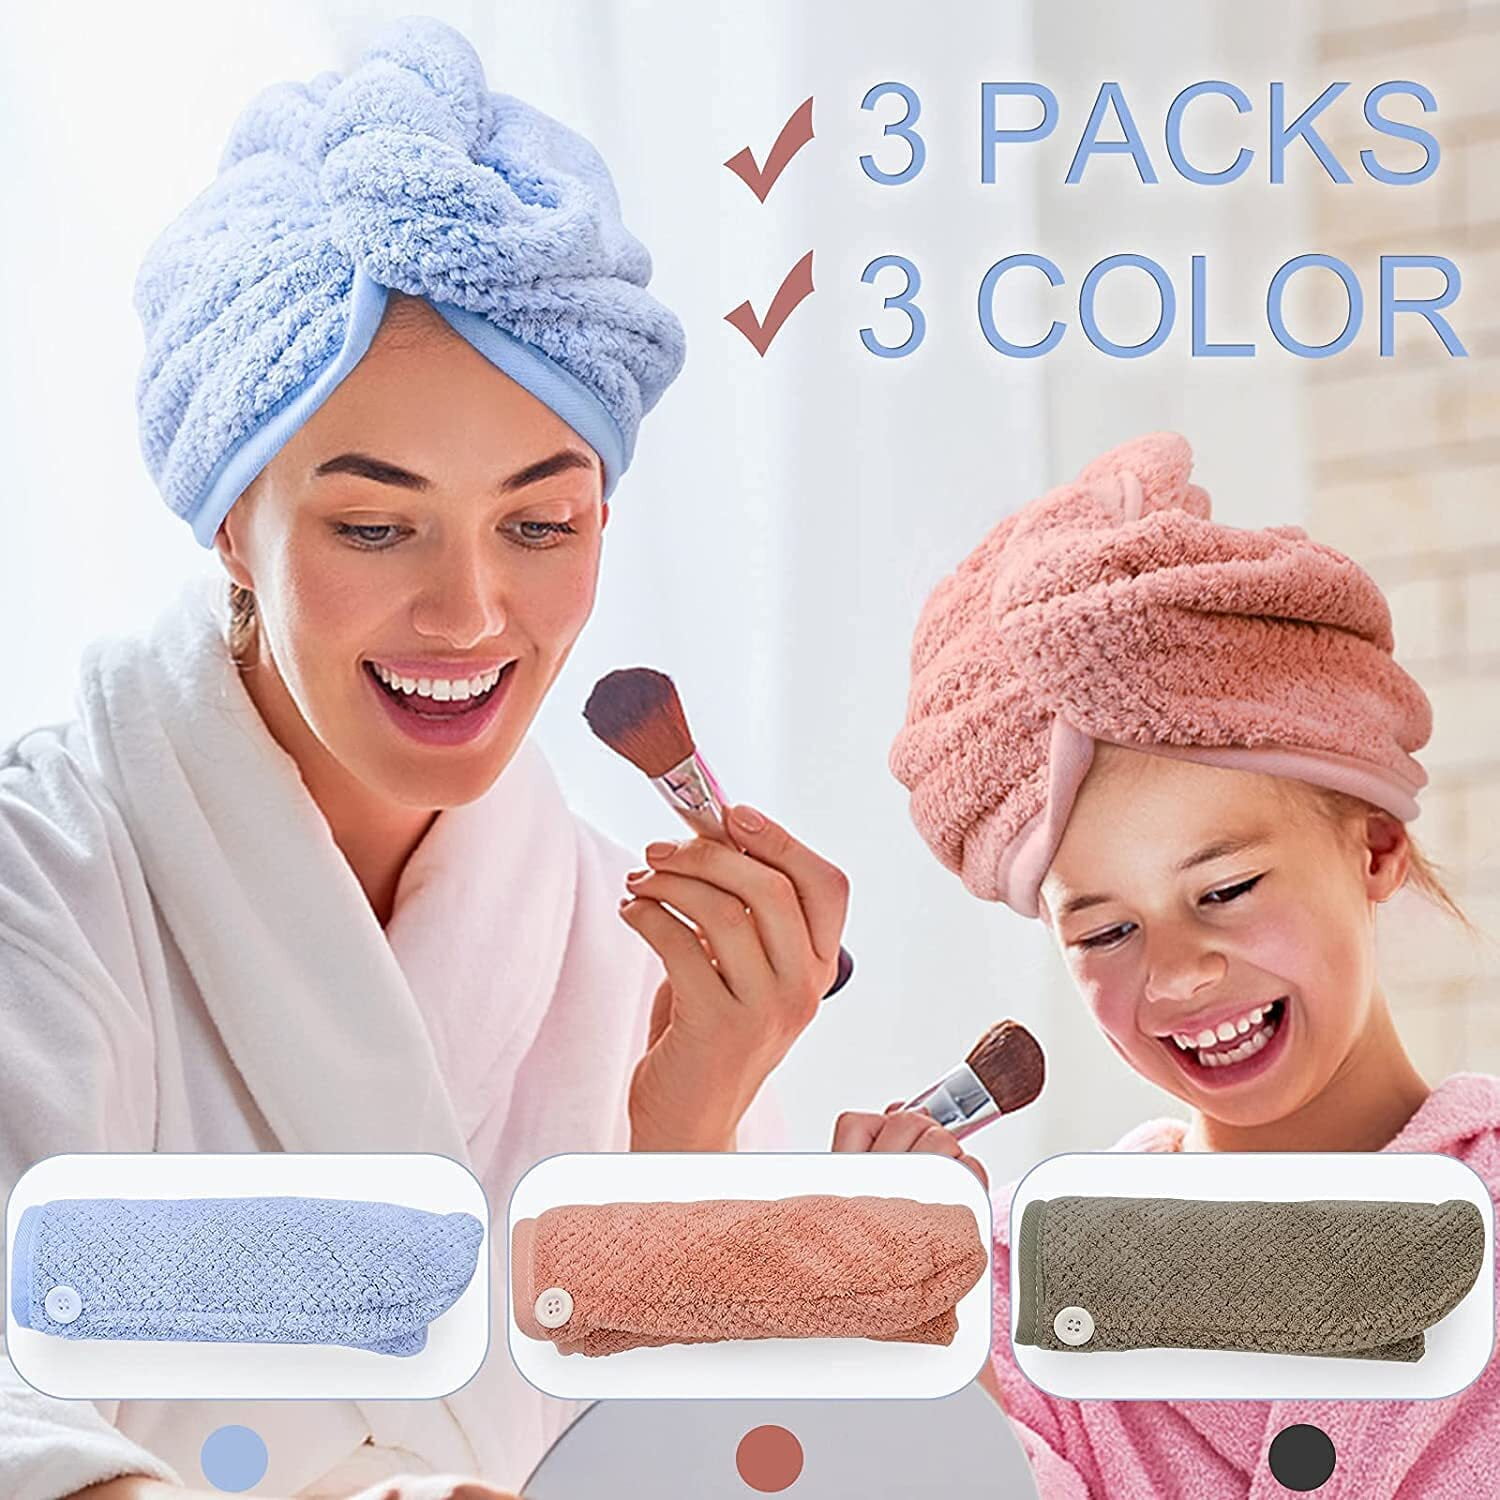 2 Packages Of The Bathery Microfiber Hair Turban & Shower Cap Combo NEW 